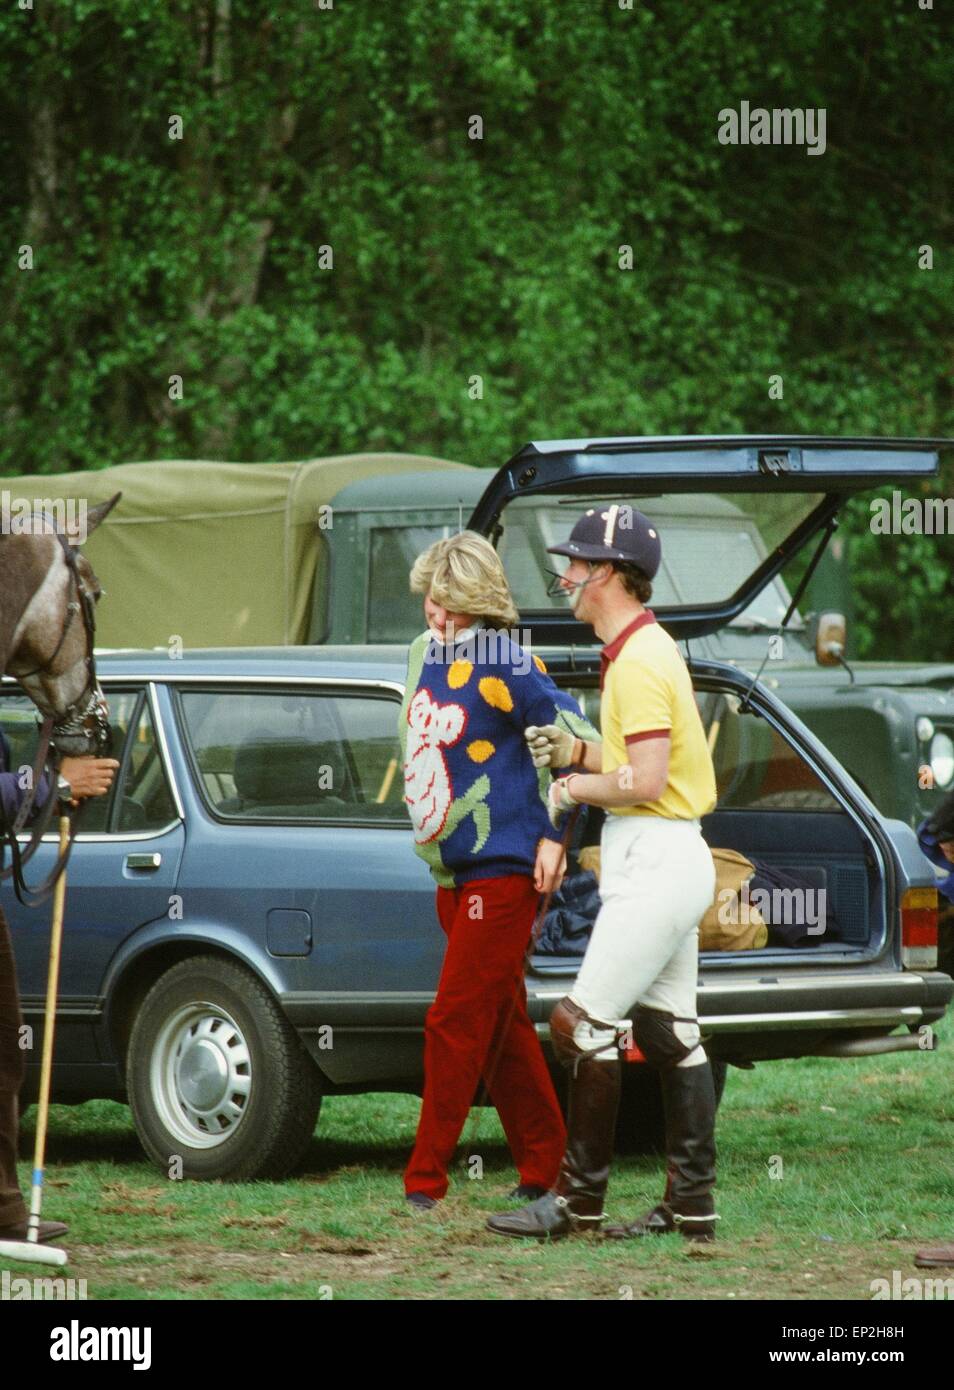 Prince and Princess of Wales at Polo at Smith's Lawn, Windsor (Diana wearing koala-patterned sweater) 2nd May 1982. Diana expecting her 1st child in 2 months. Stock Photo